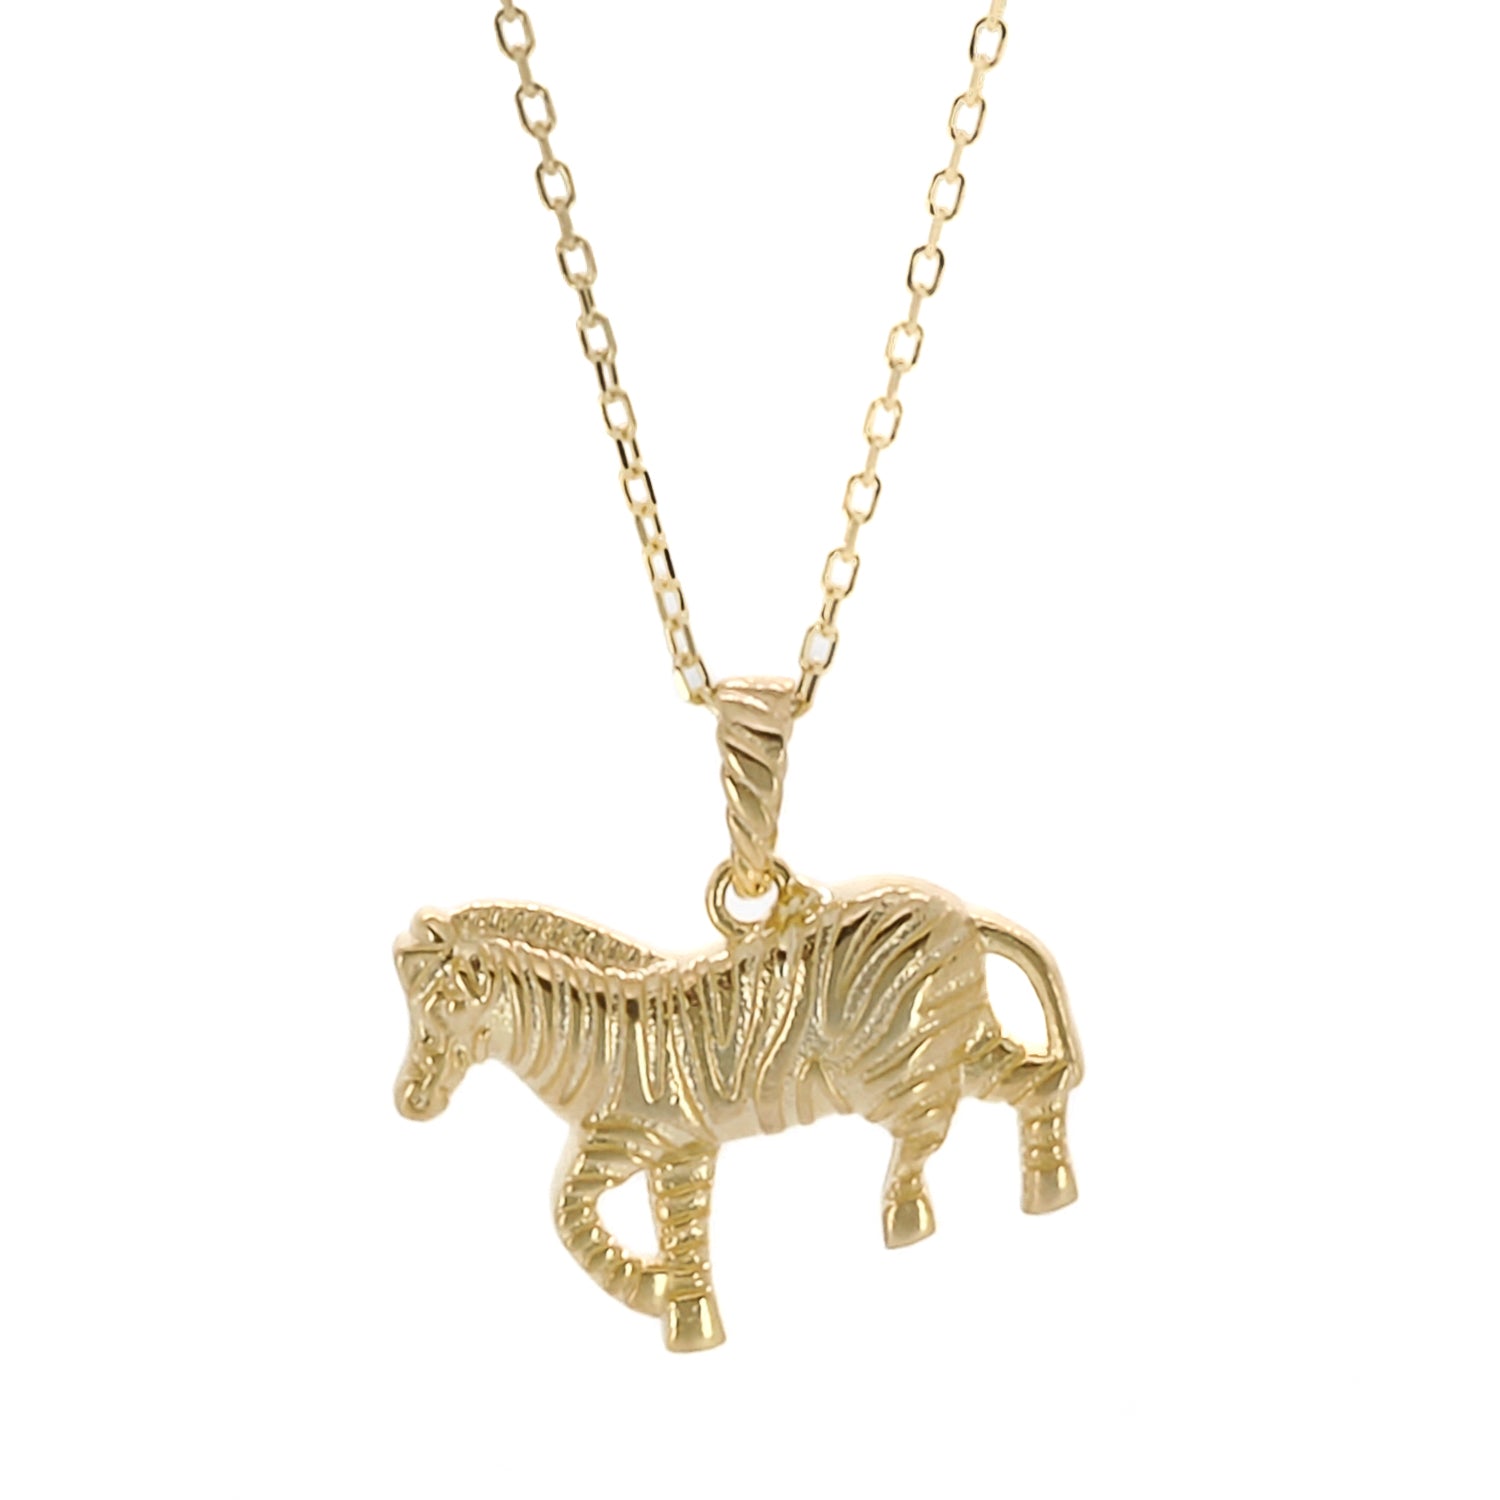 The Gold Zebra Necklace, a captivating piece featuring a stunning zebra pendant suspended from an 18K gold plated chain.